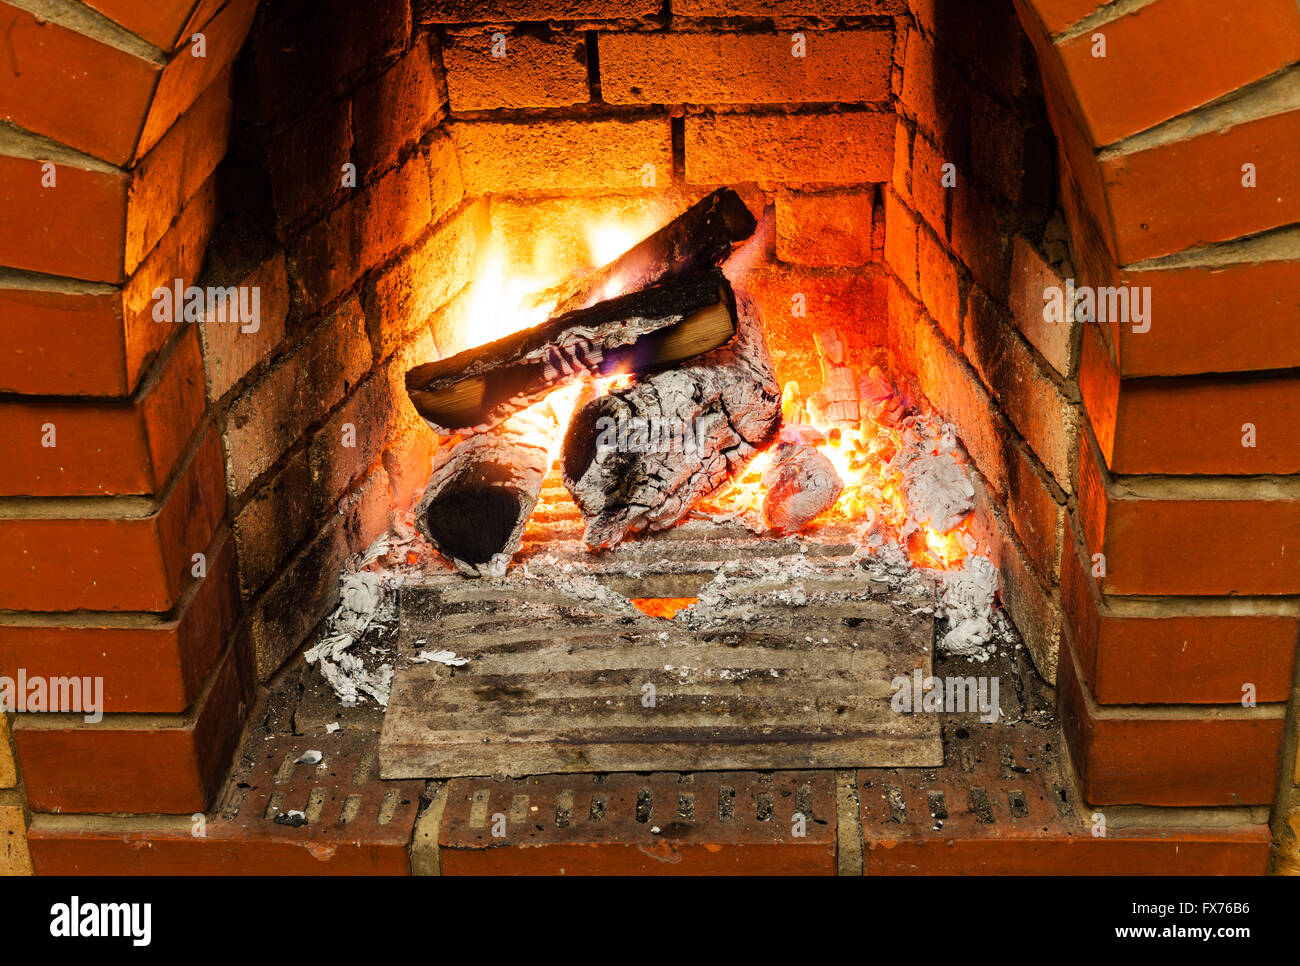 ash, coal and burning firewood in fireplace in country cottage Stock Photo